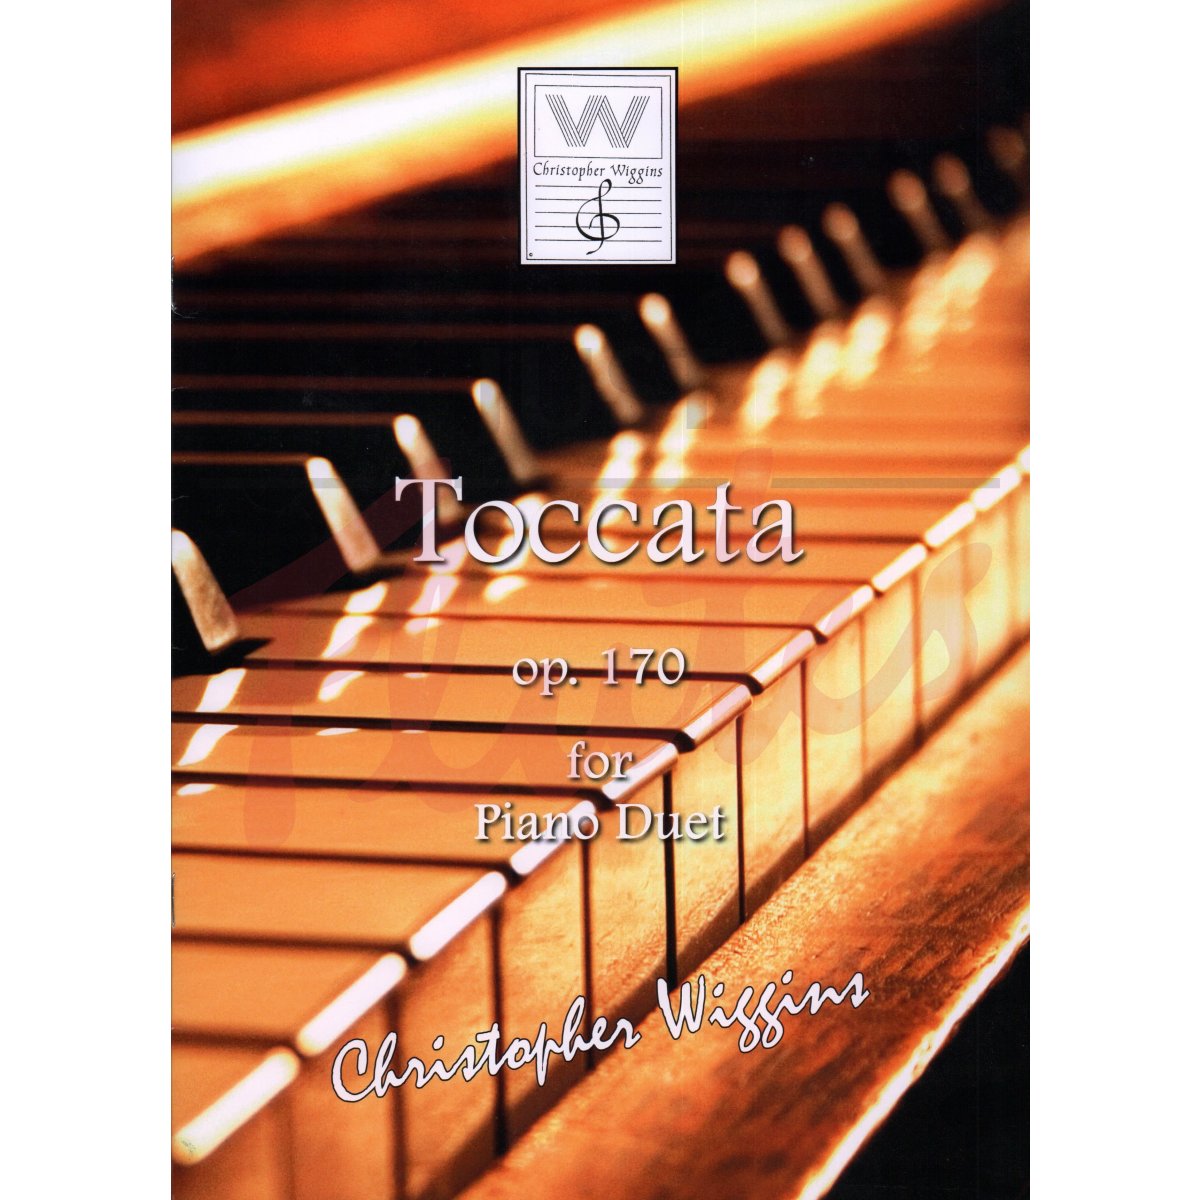 Toccata for Piano Duet